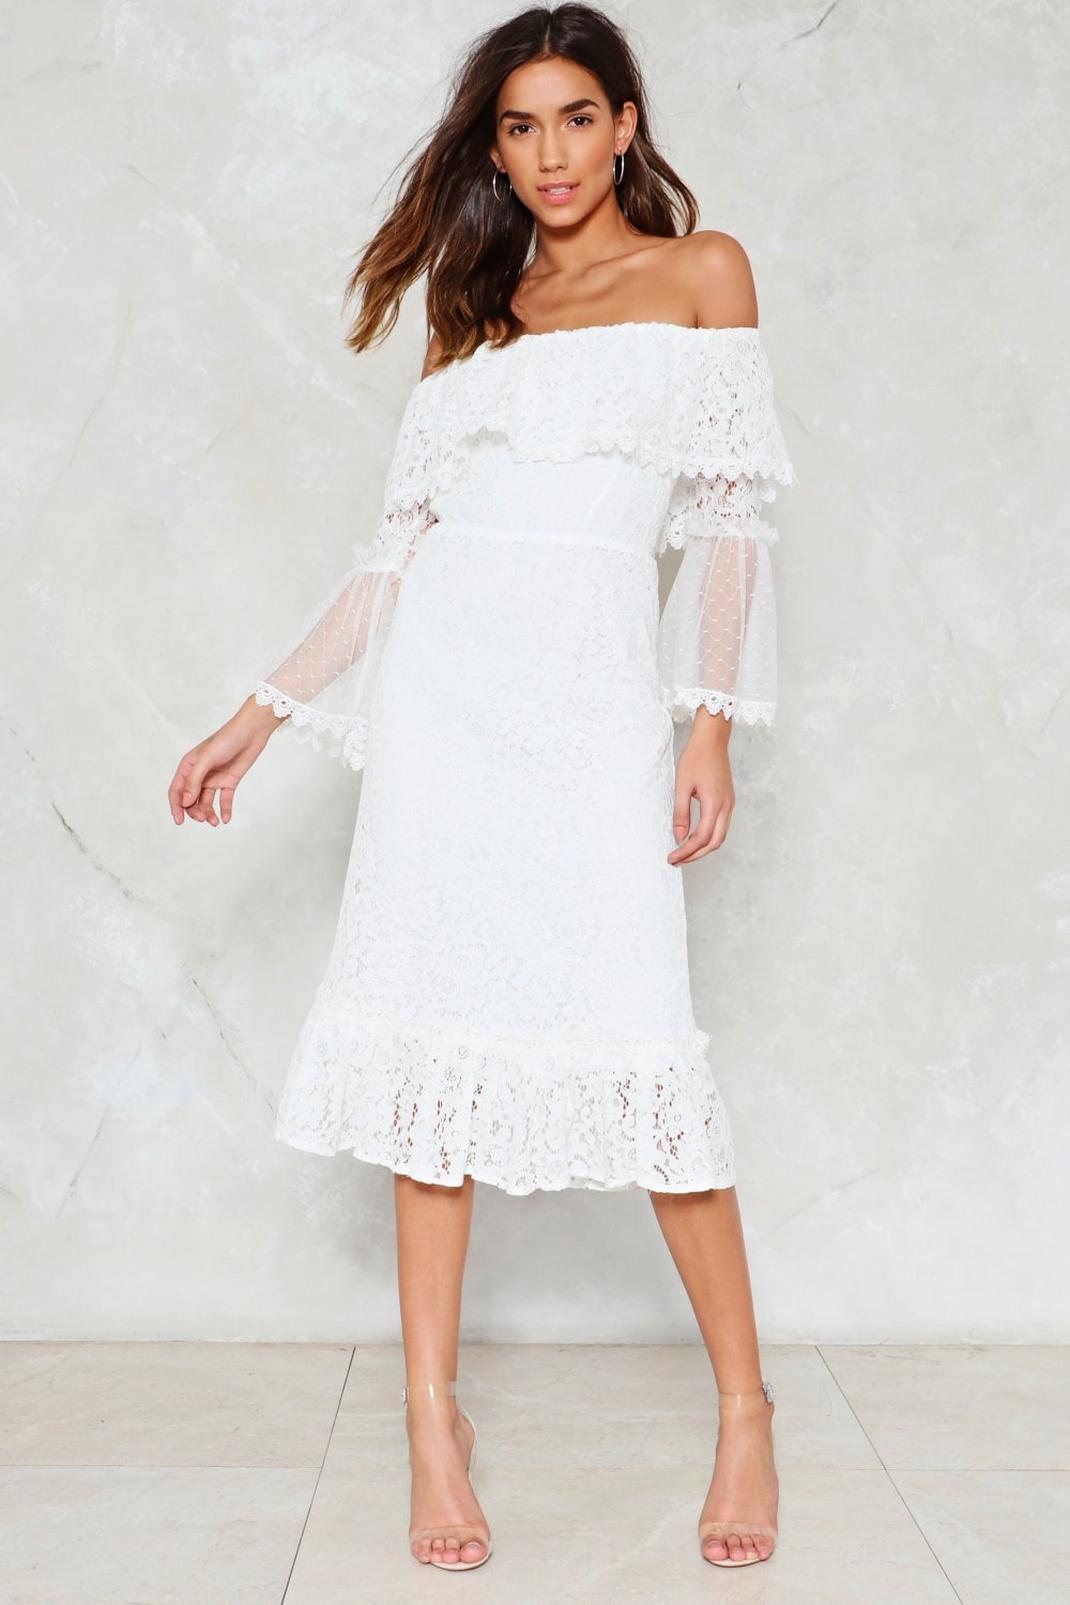 Do It in the Name of Lace Dress | Nasty Gal